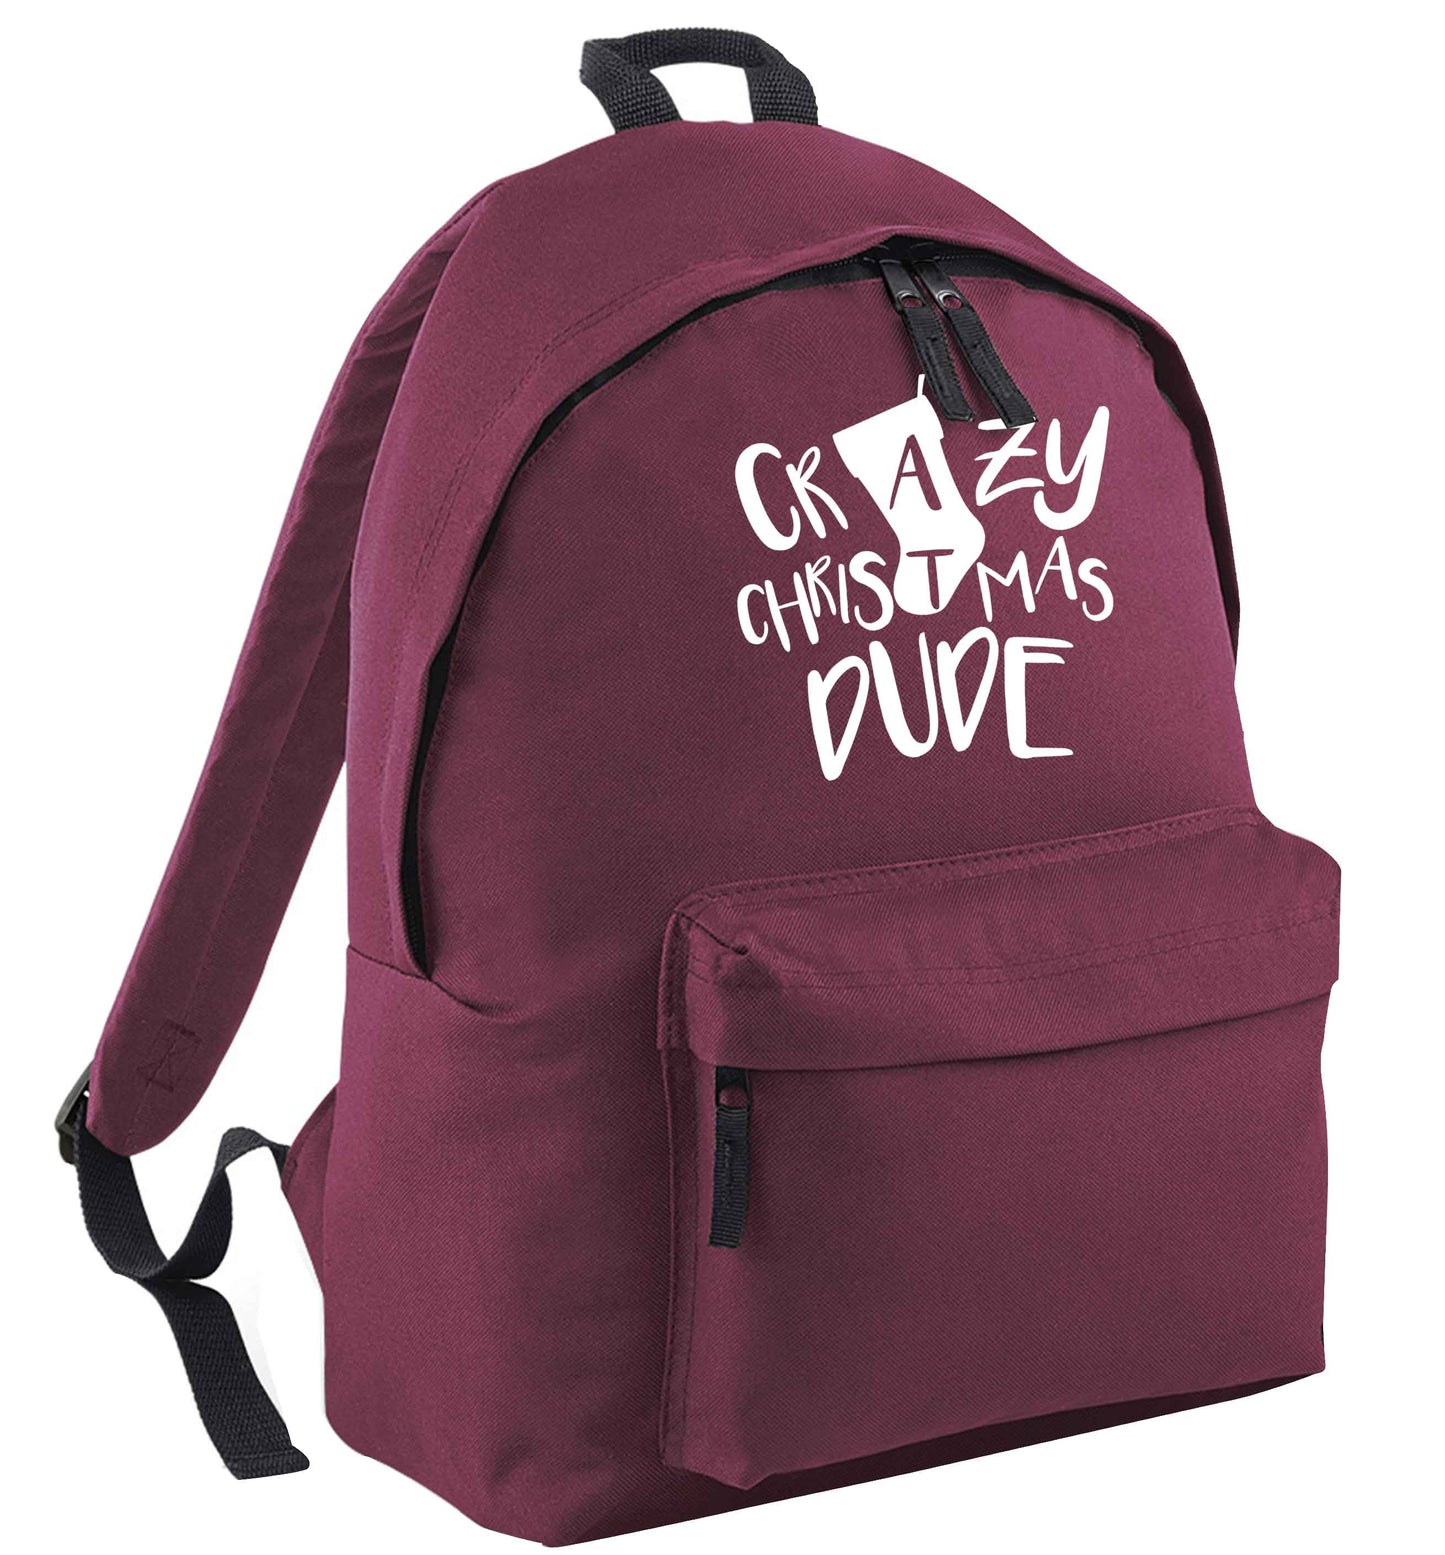 Crazy Christmas Dude maroon adults backpack